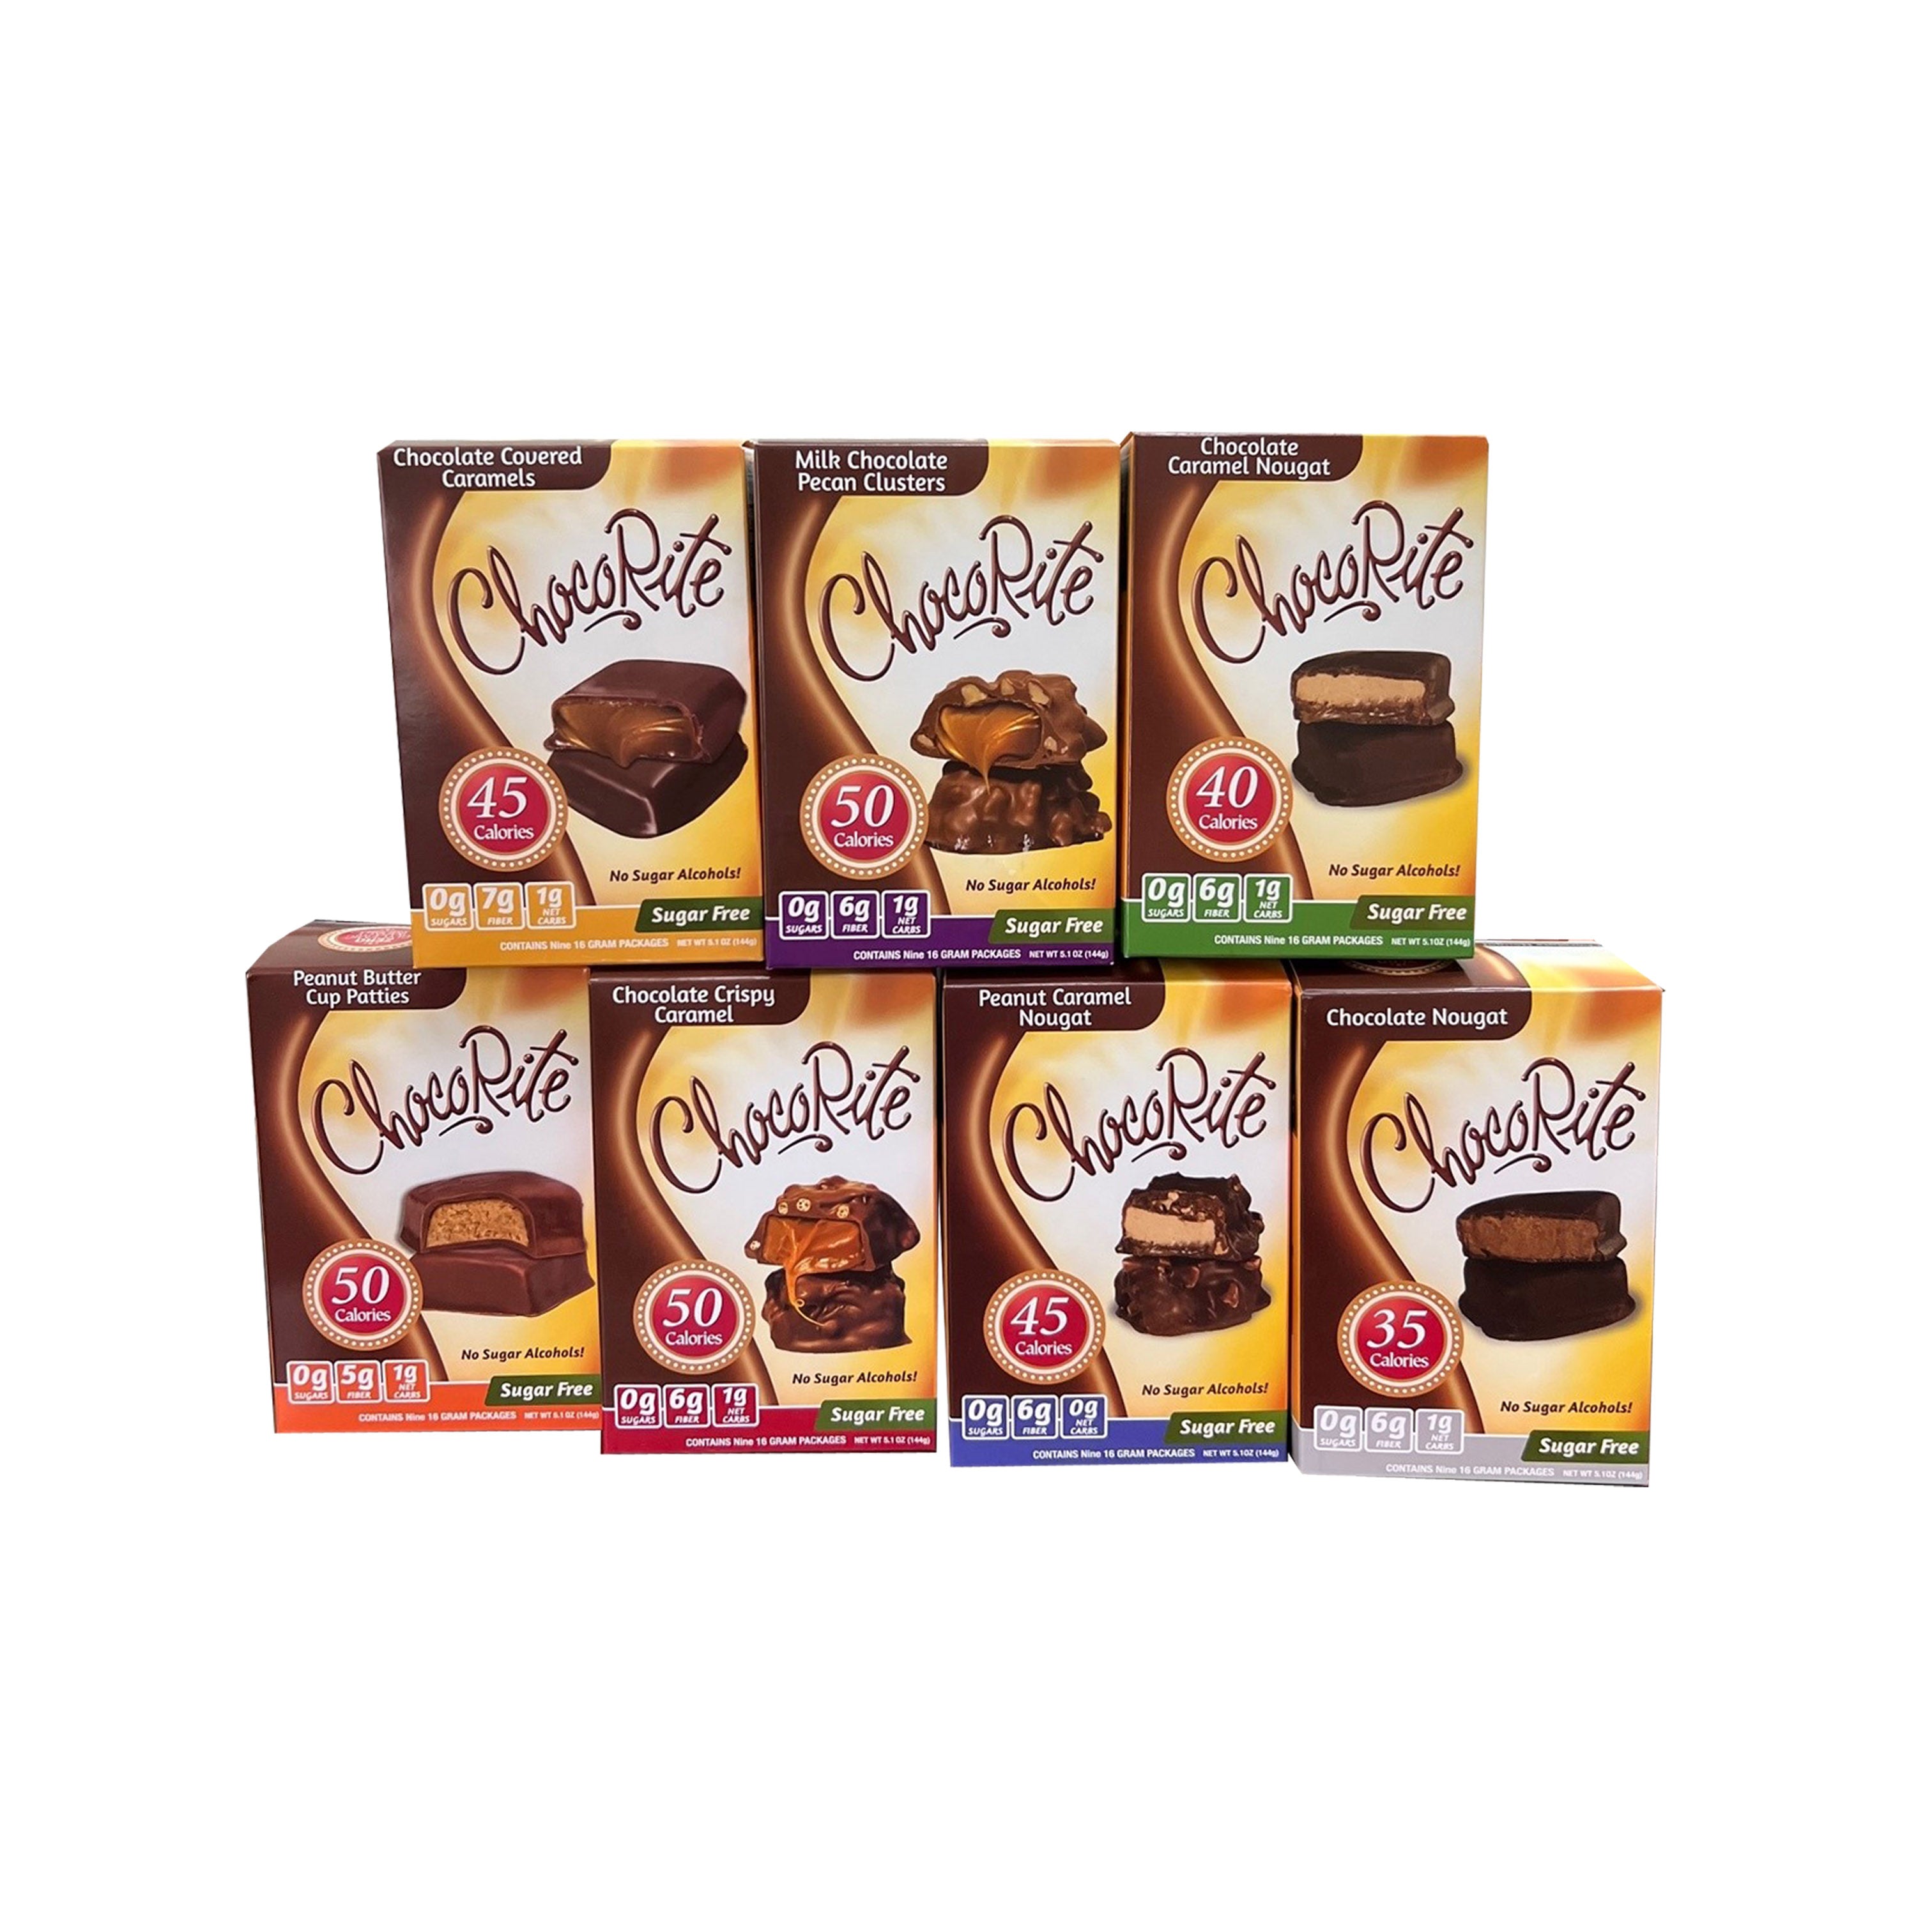 Indulge Guilt-Free with our New ChocoRite Sugar-Free Candy: 33% Larger, No Sugar Alcohols!